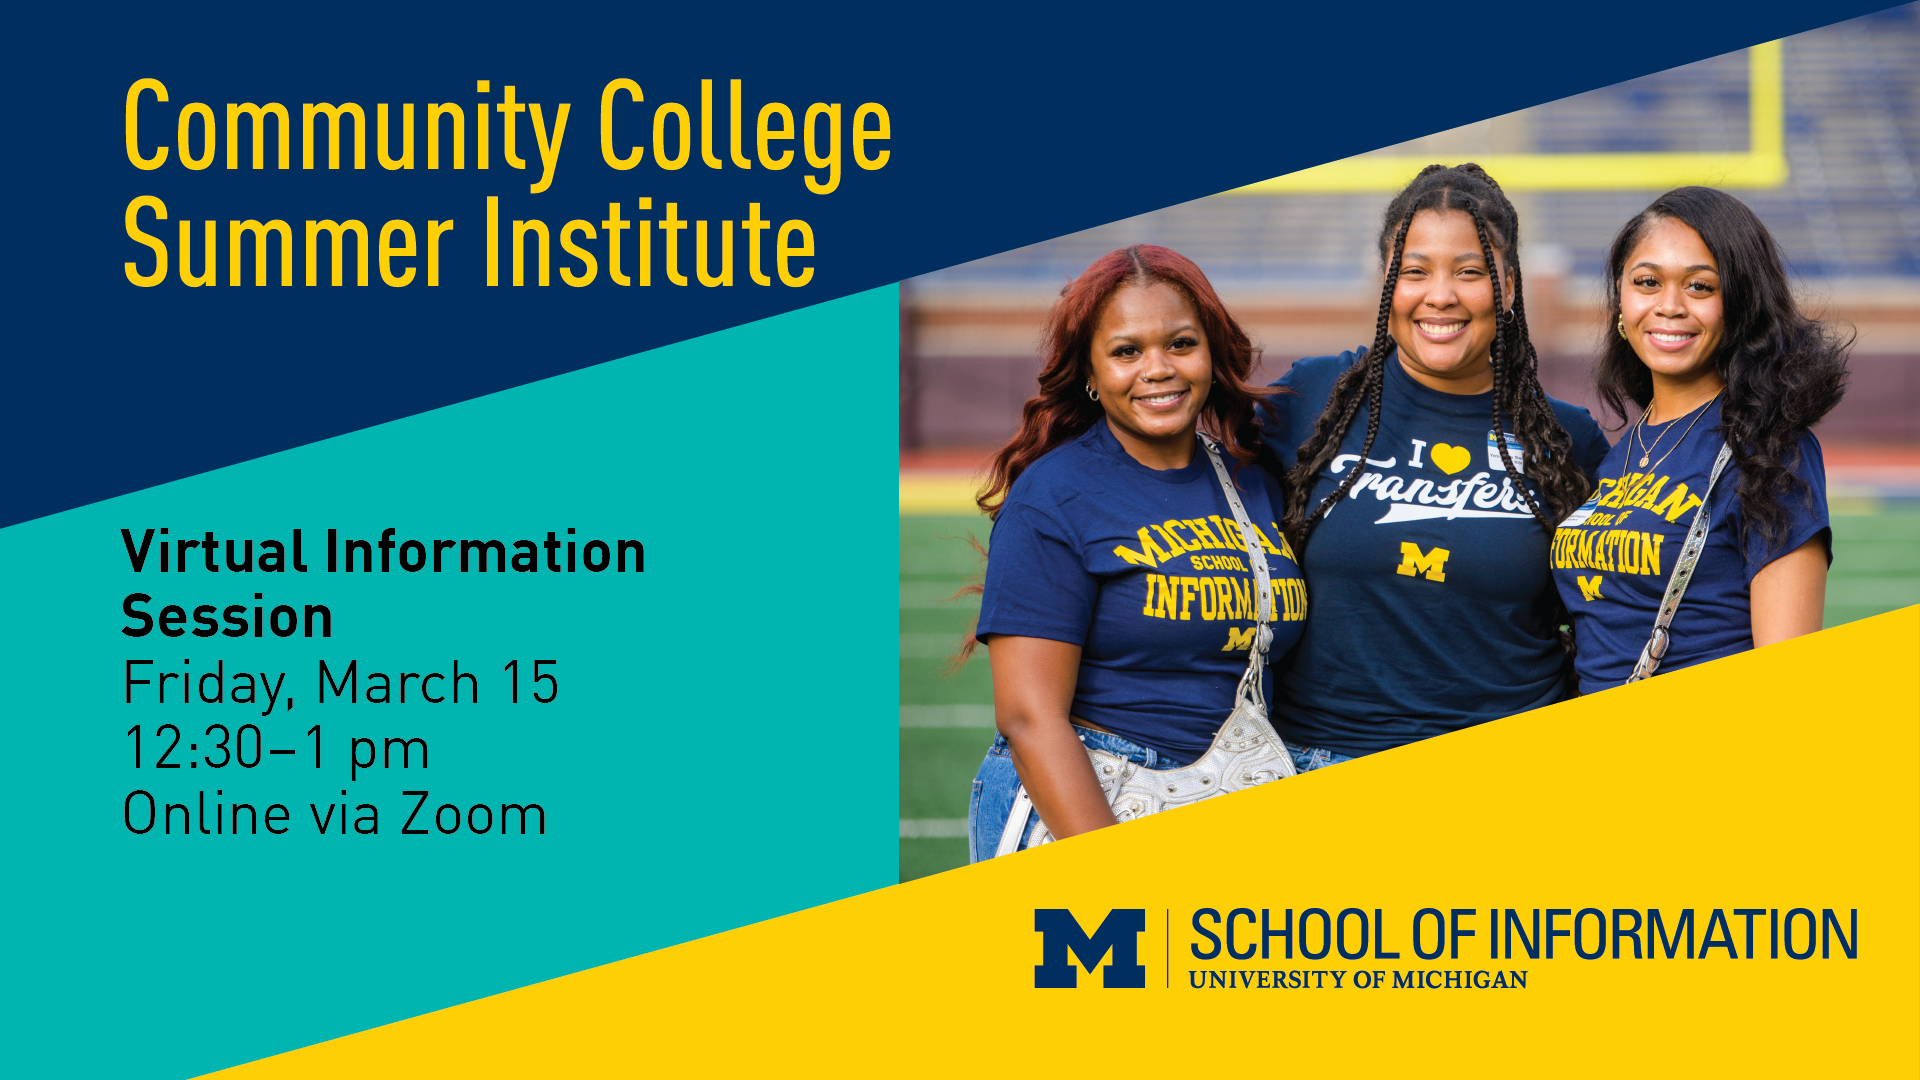 "Community College Summer Institute Virtual Information Session. Friday, March 15. 12:30-1 pm. Online via Zoom. University of Michigan School of Information."